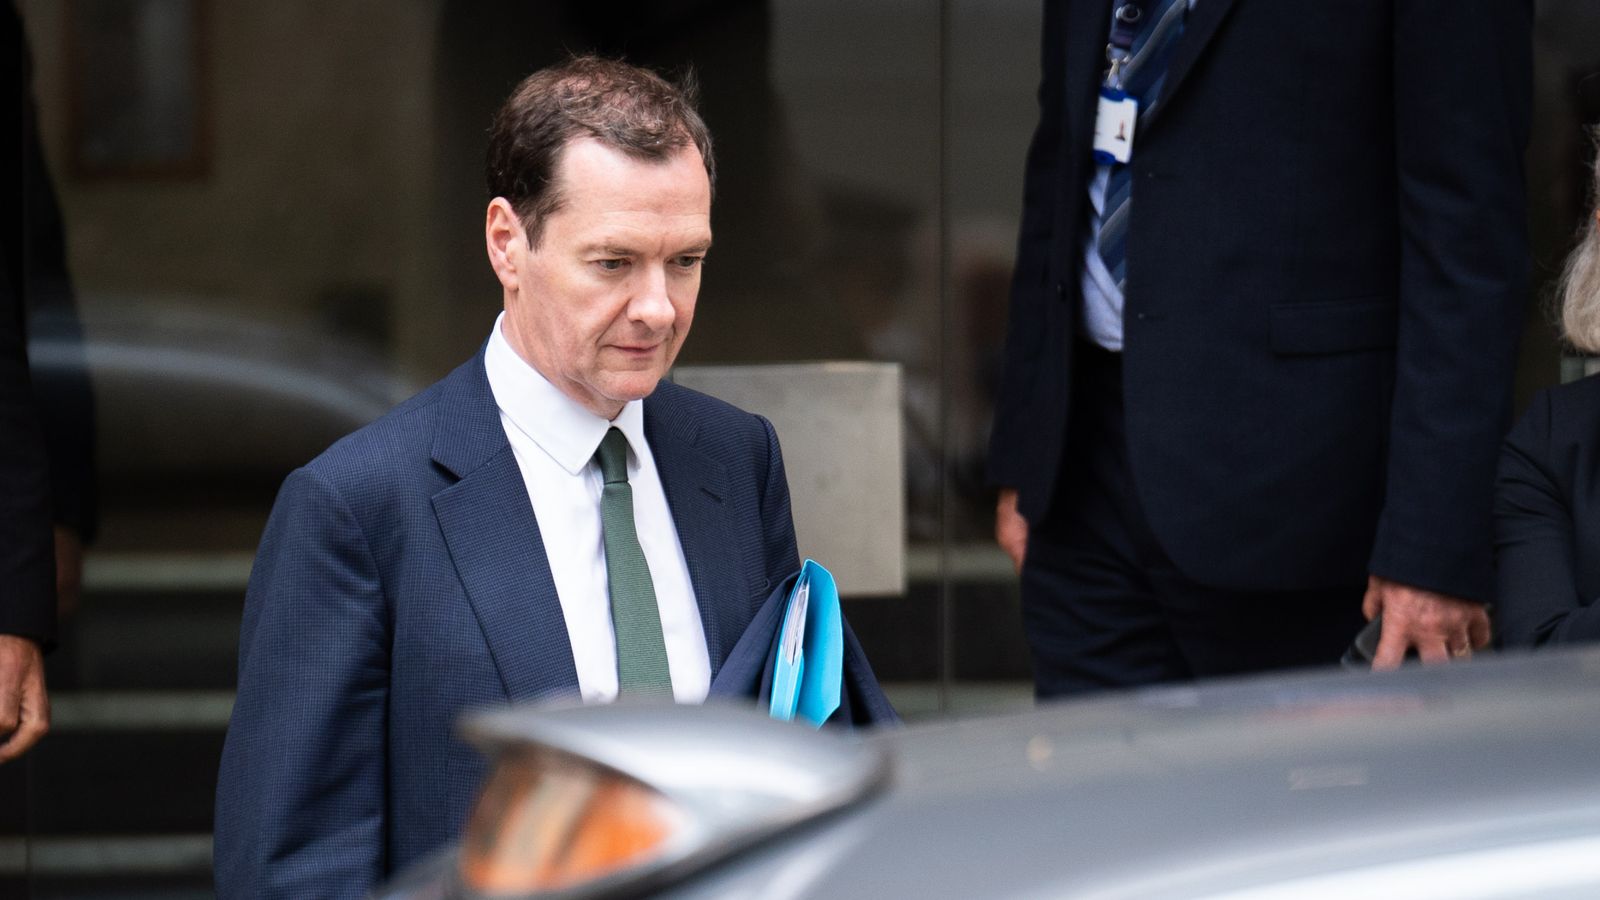 COVID inquiry: George Osborne rejects claims his austerity programme left NHS in 'parlous state' ahead of pandemic